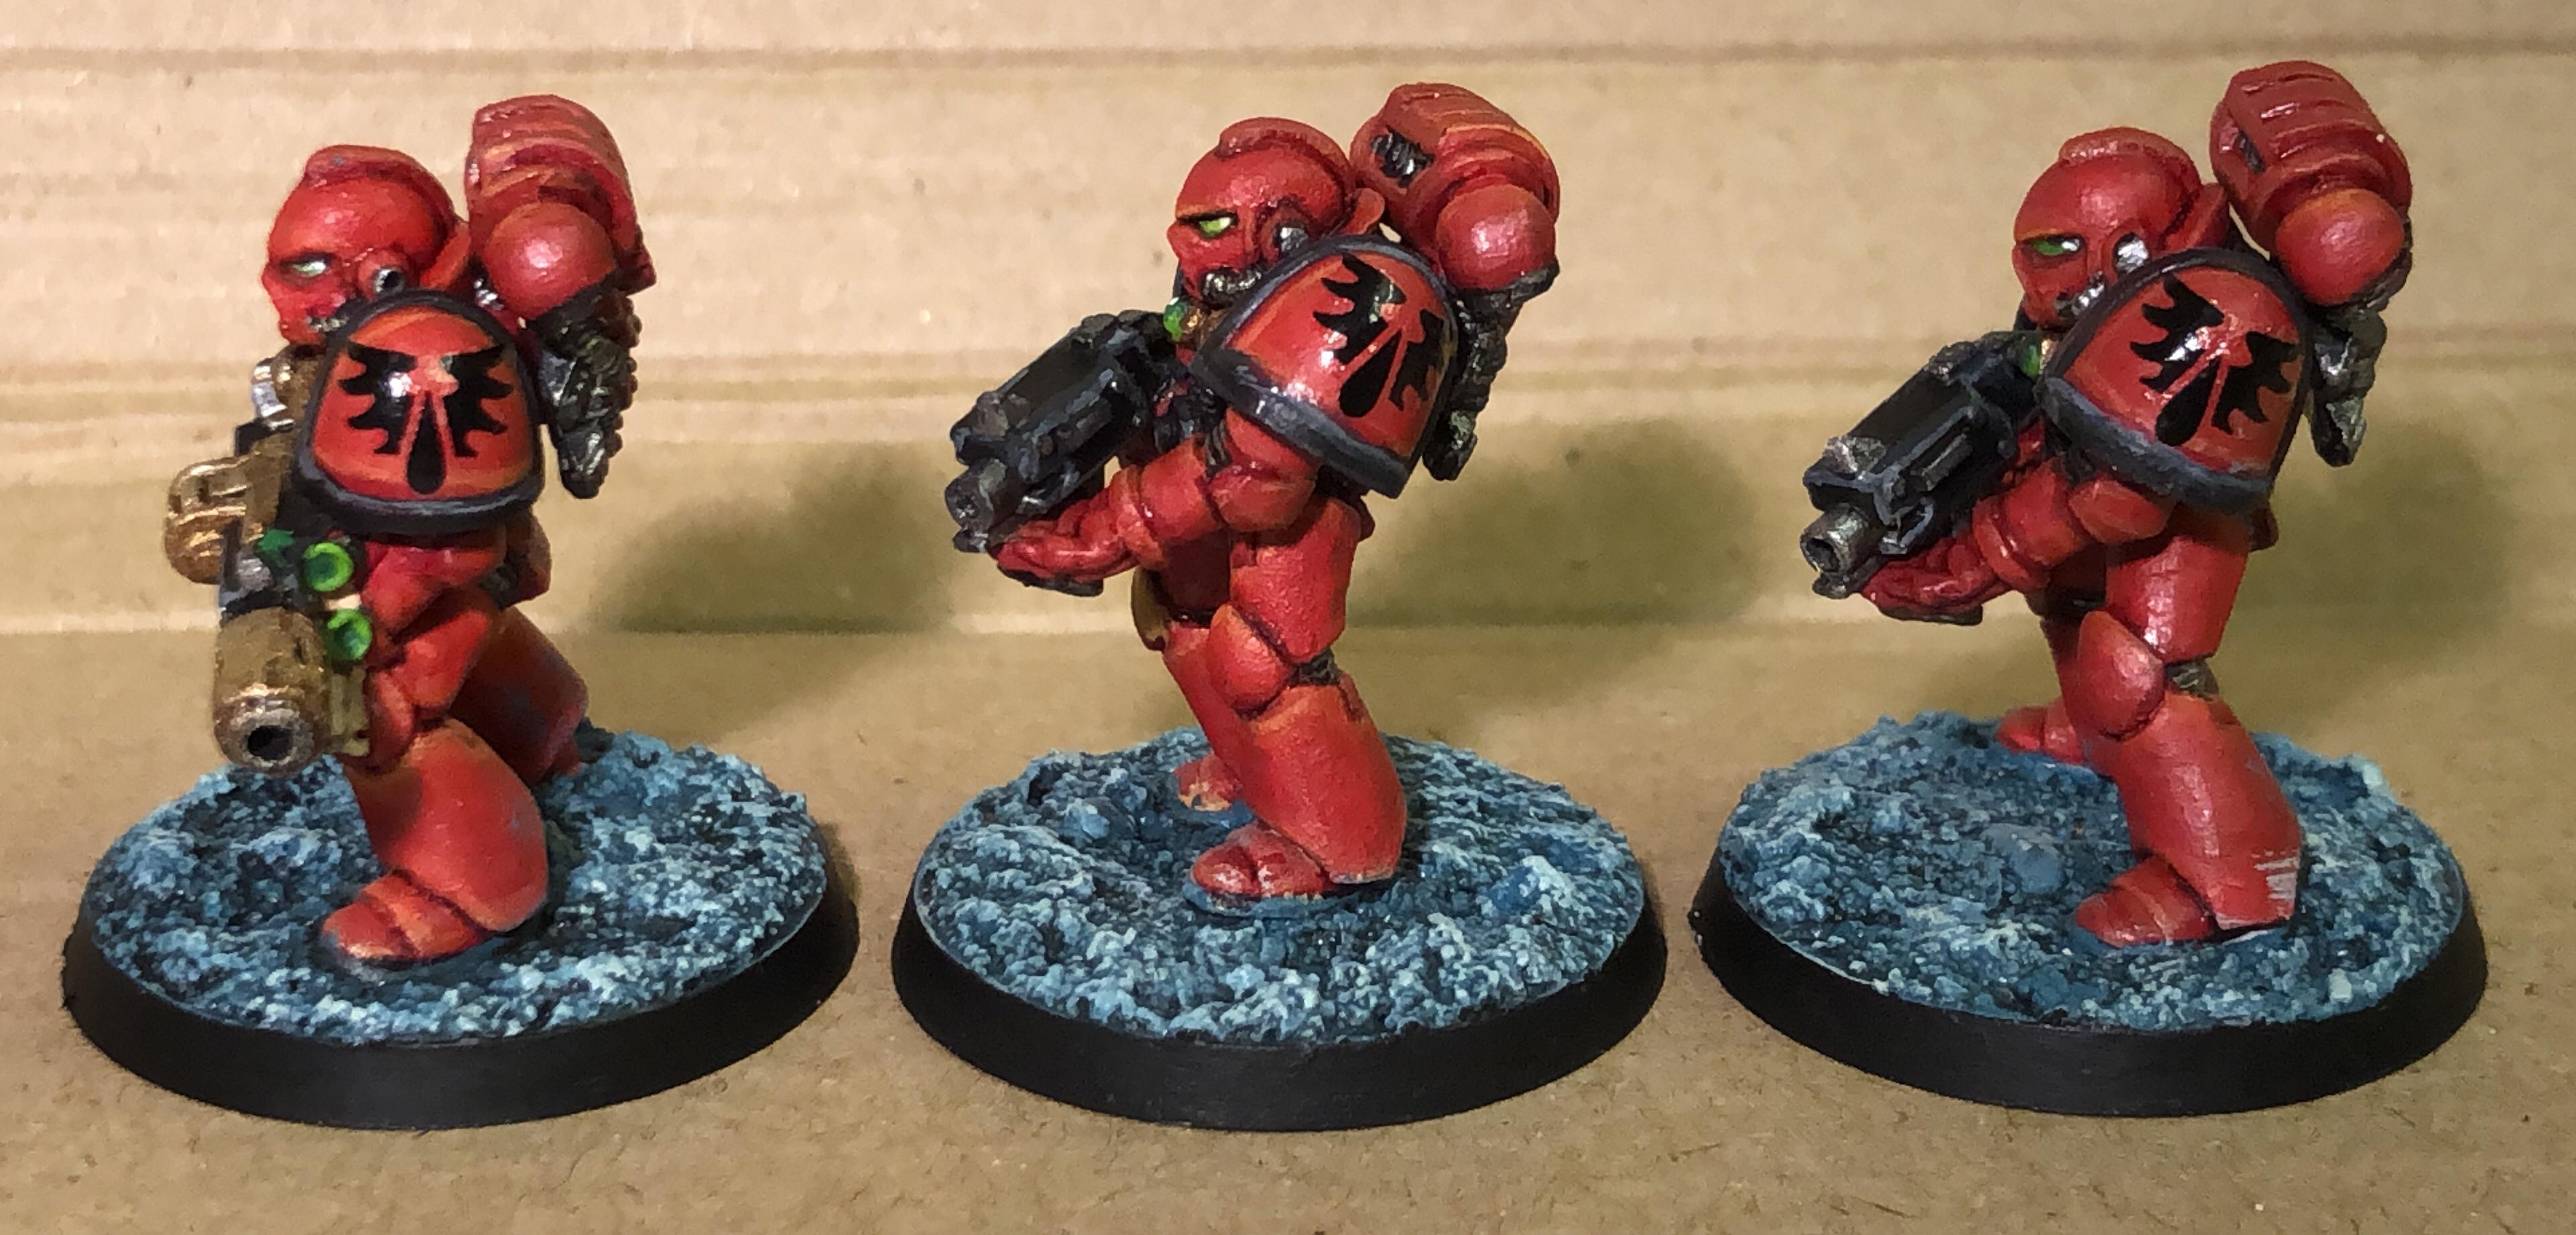 2nd Edition, Blood Angels, Space Marines, Tactical Marines; Space Marines, Warhammer 40,000